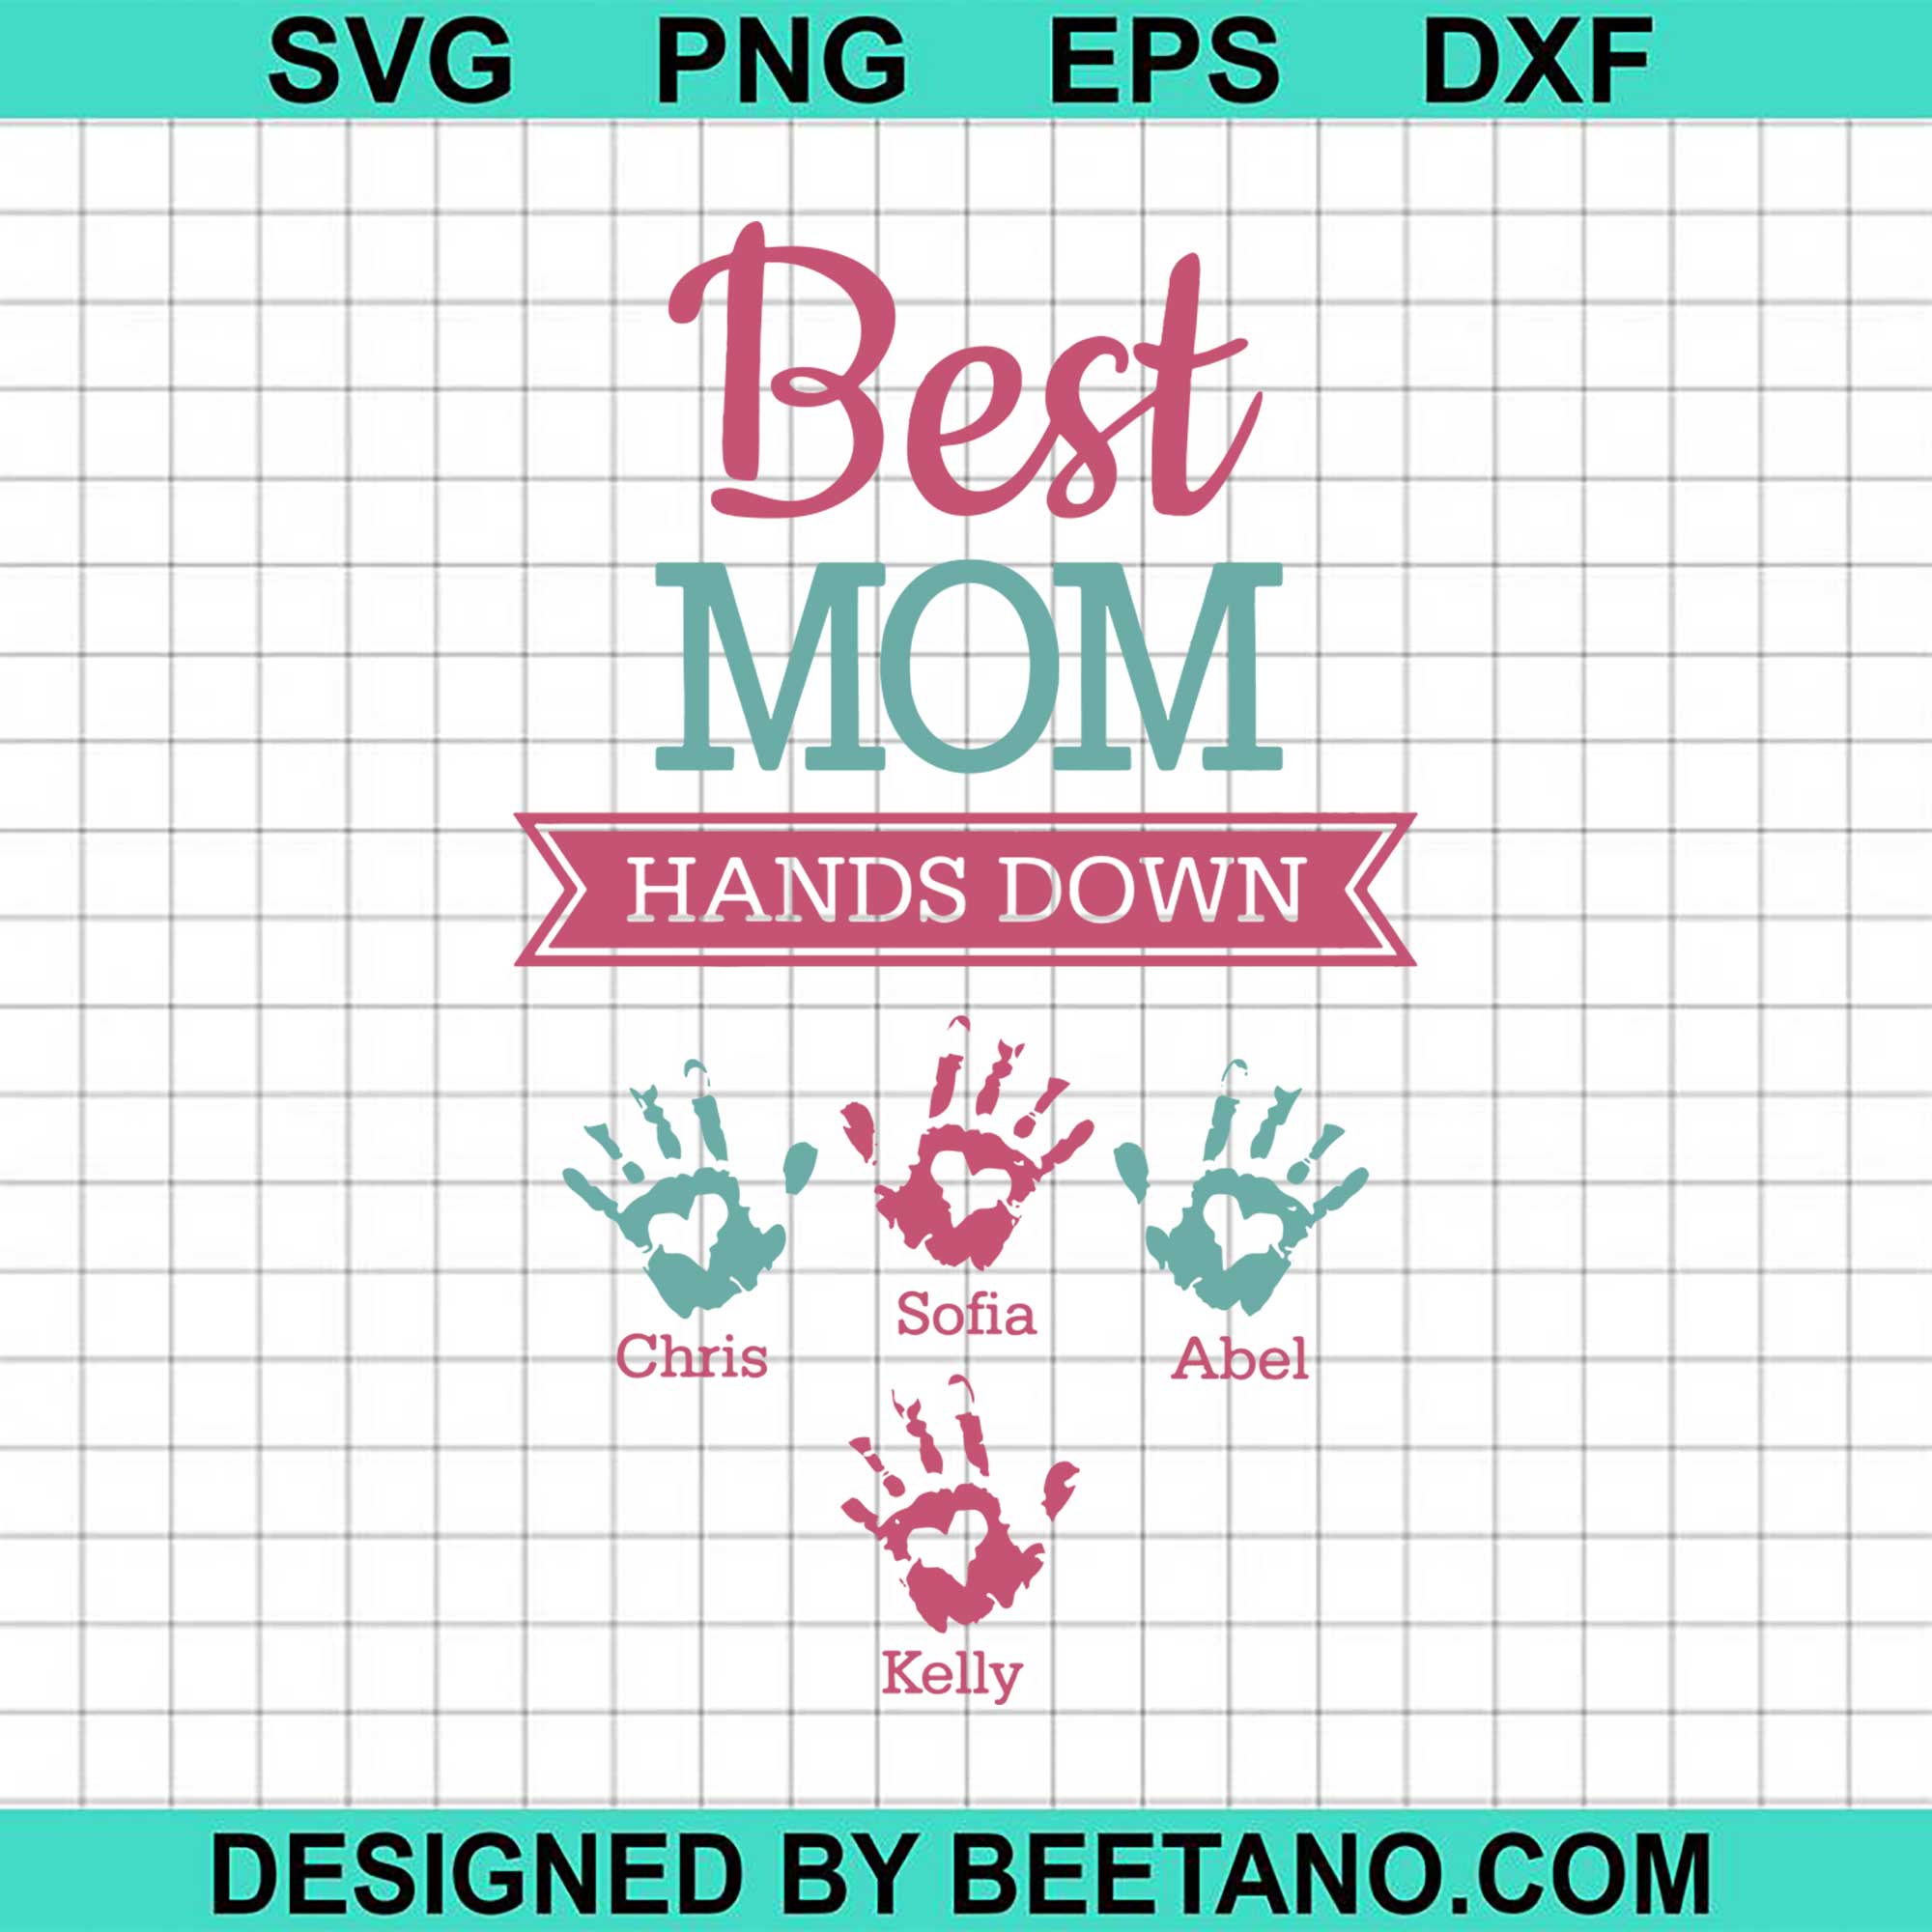 Download Best Mom Hands Down Svg Cut File For Cricut Silhouette Machine Make Cr